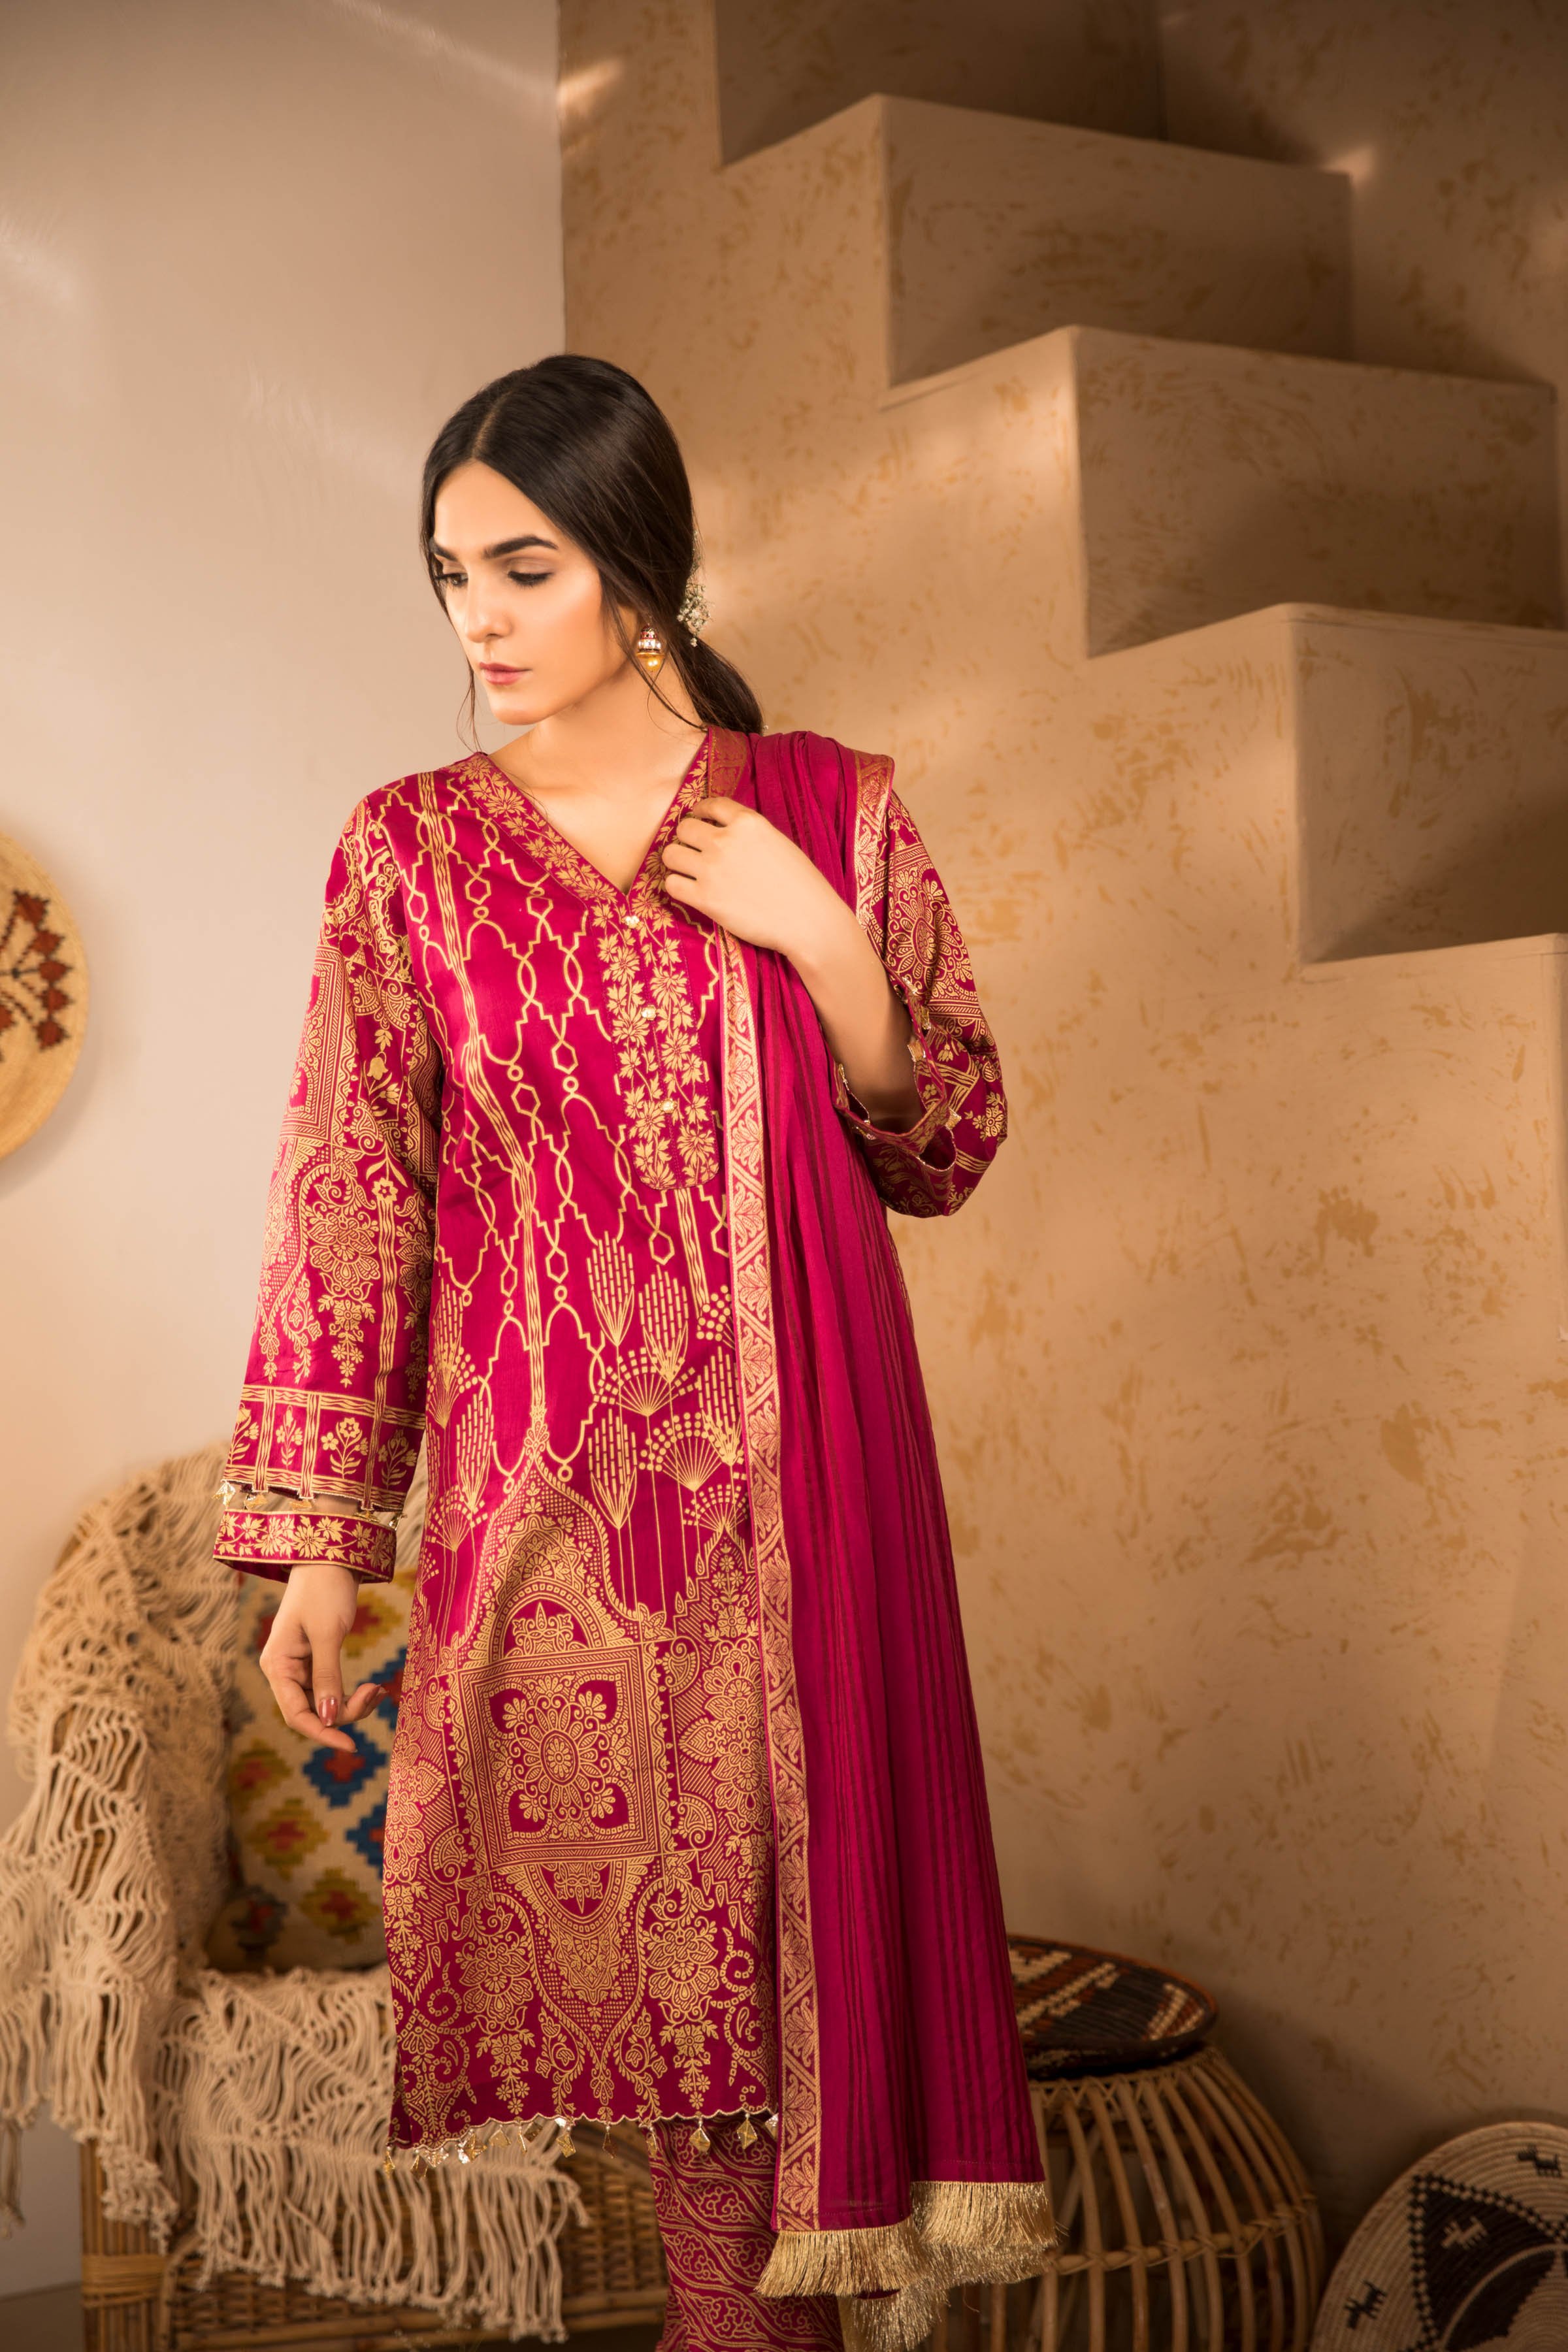 Traditional and beautiful red best Pakistani dress by Sapphire online